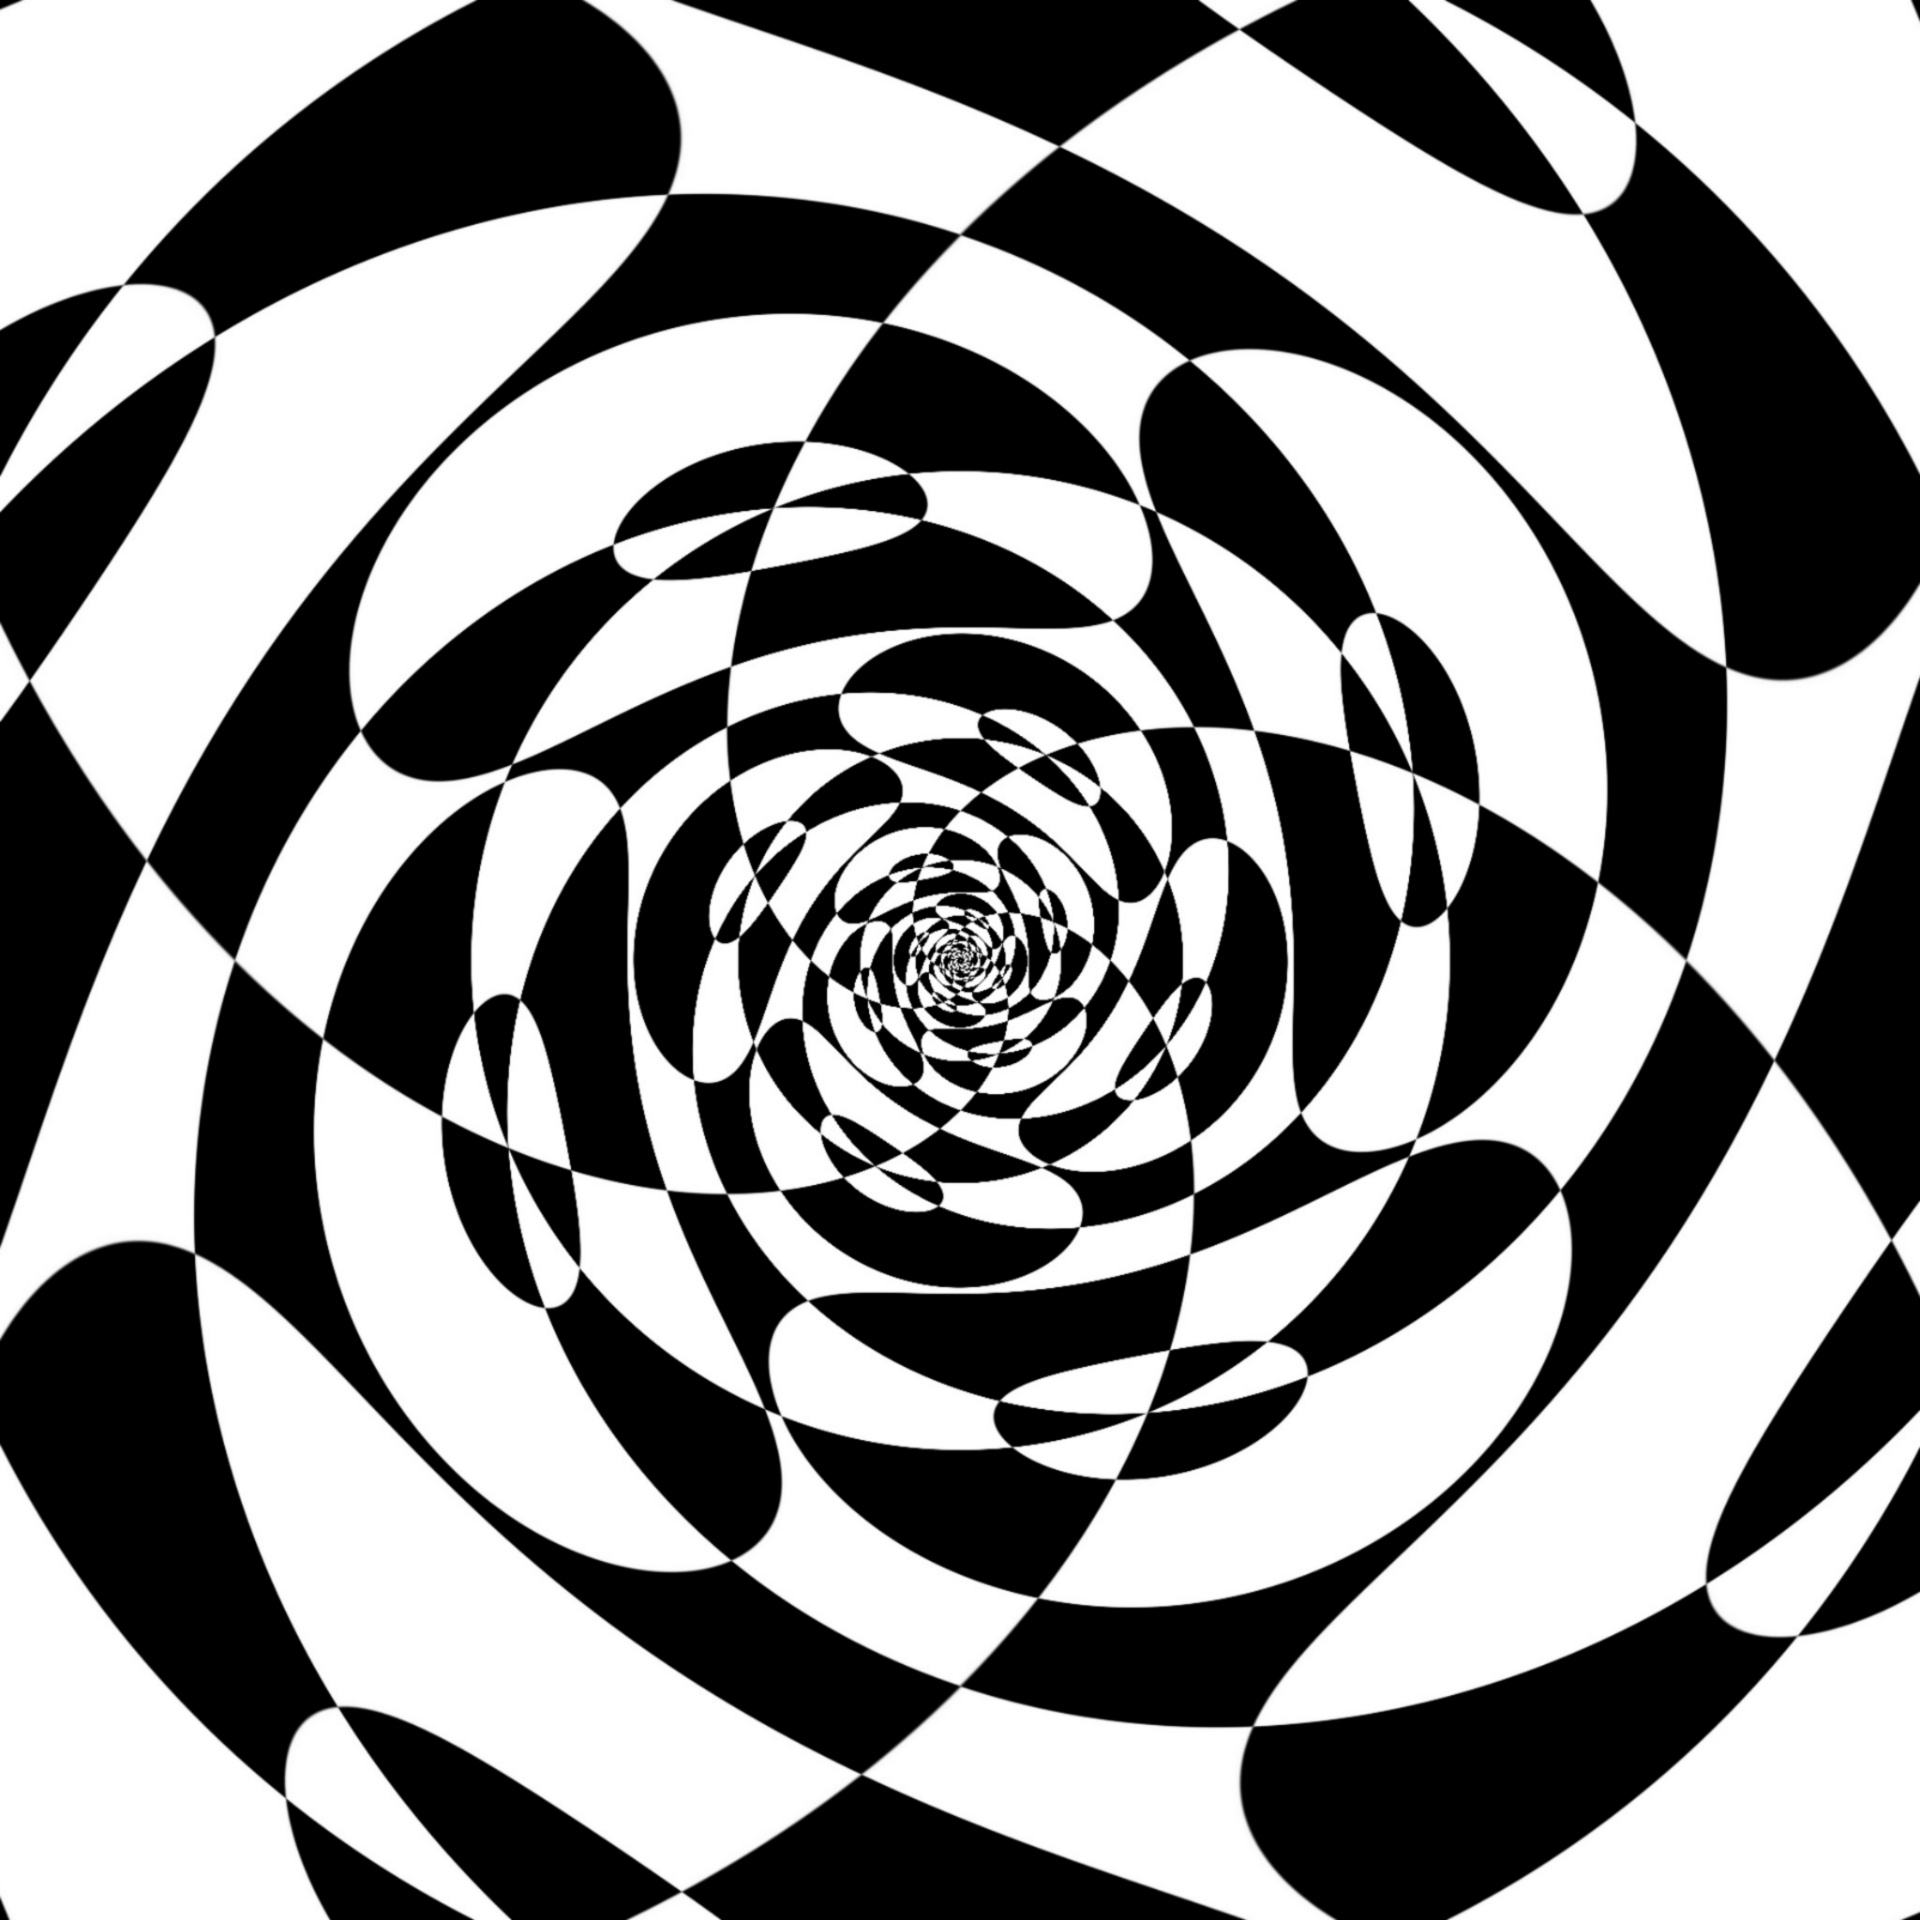 drawing of a black spiral on white background